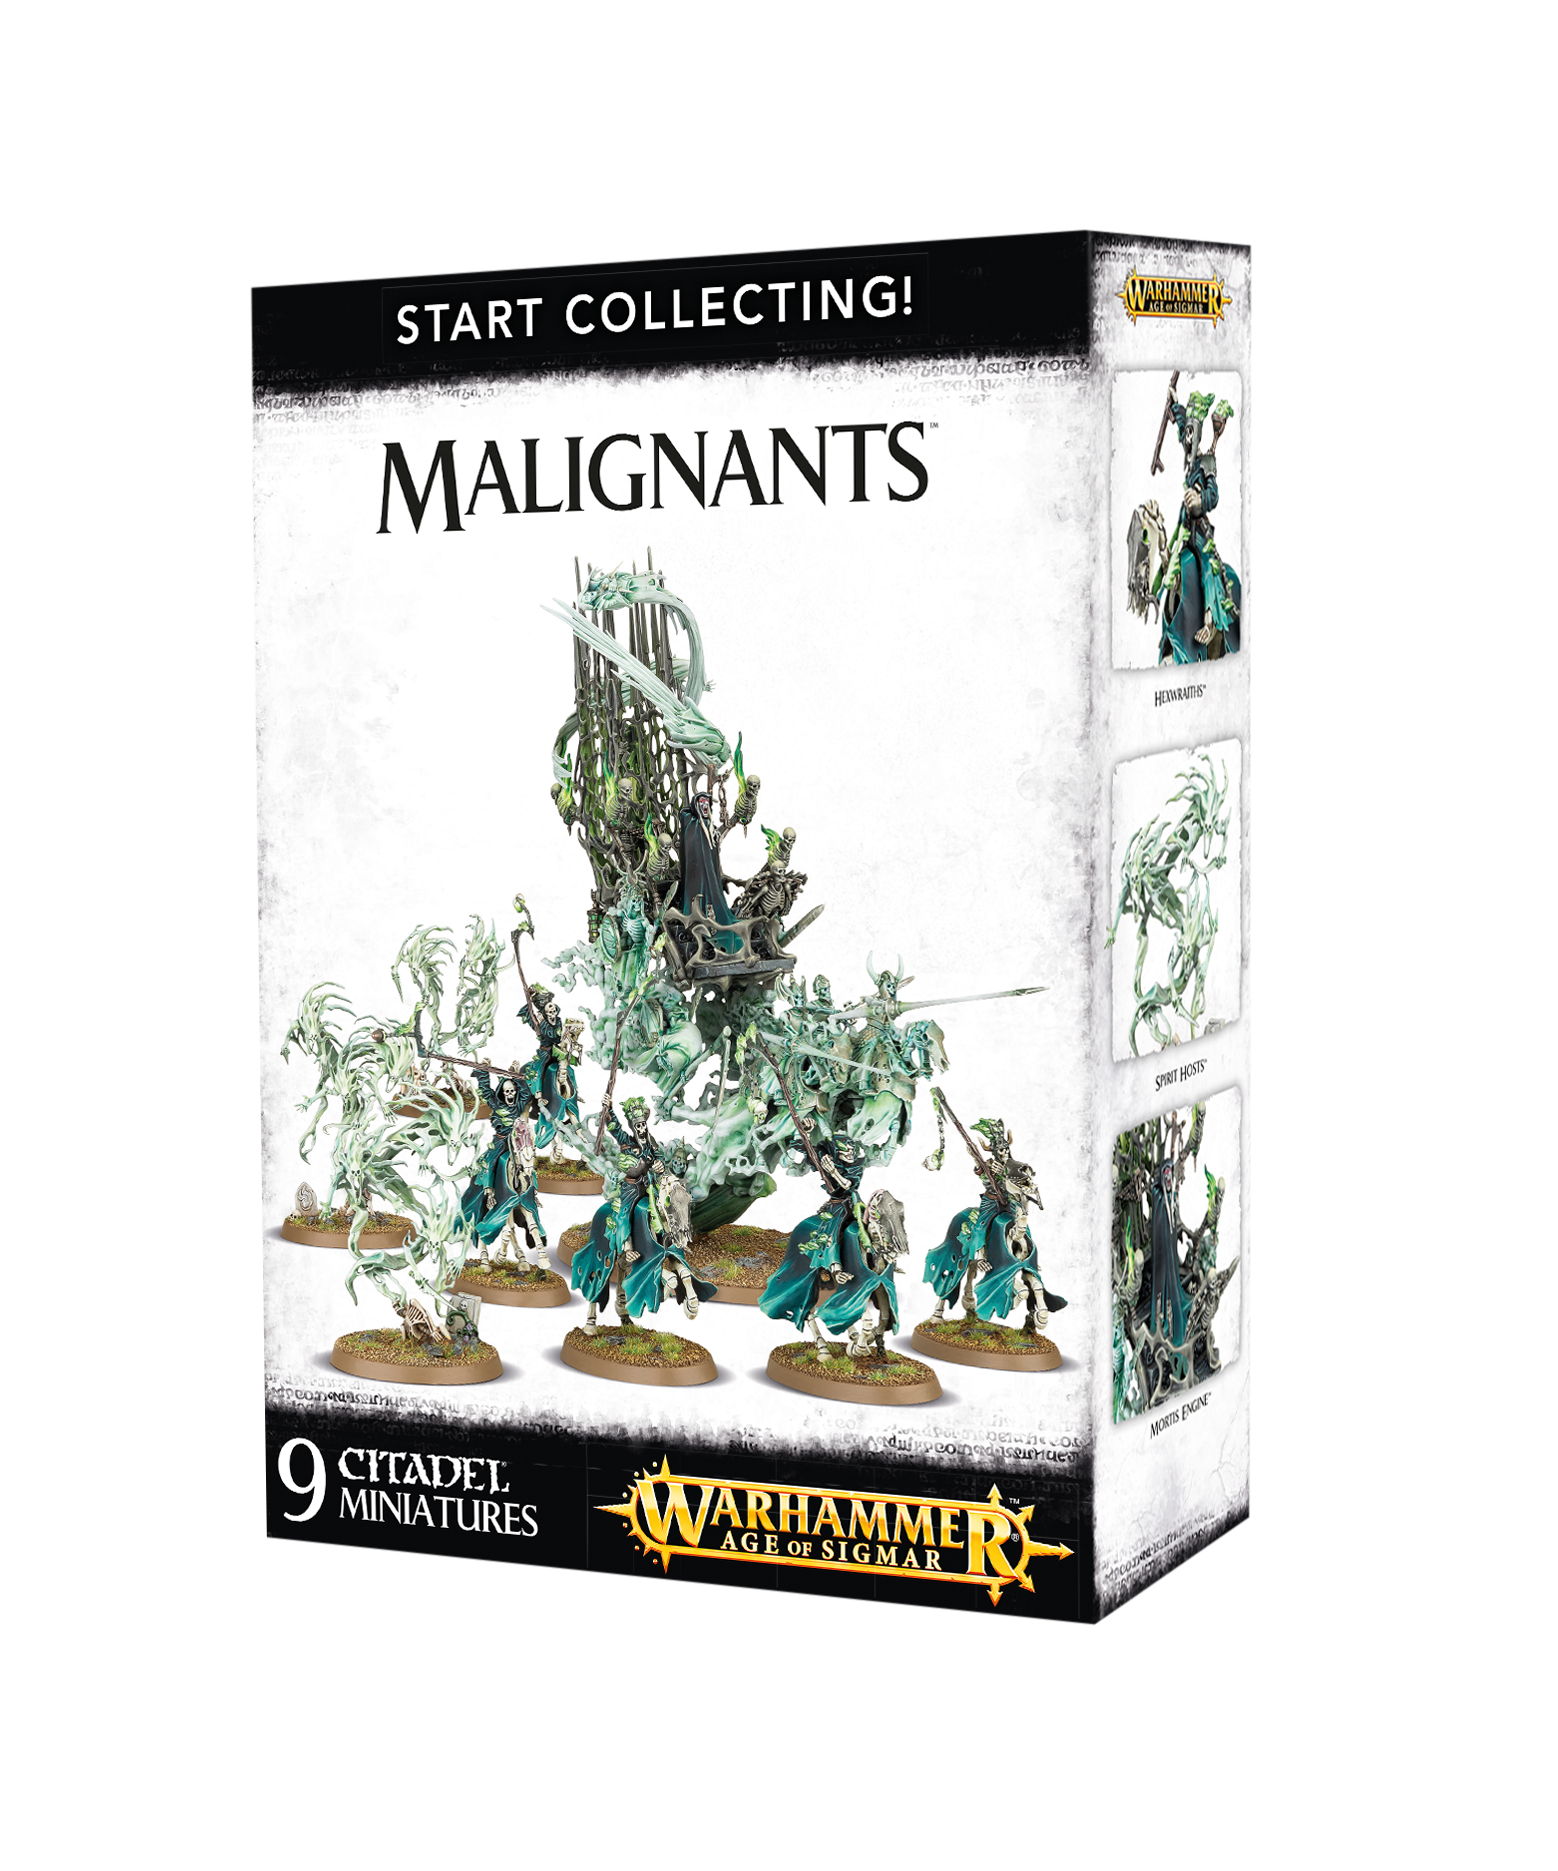 Warhammer age of Sigmar. Start collecting! Malignants. Malignants start collecting. Миниатюры games Workshop start collecting! Malignants. Start collection